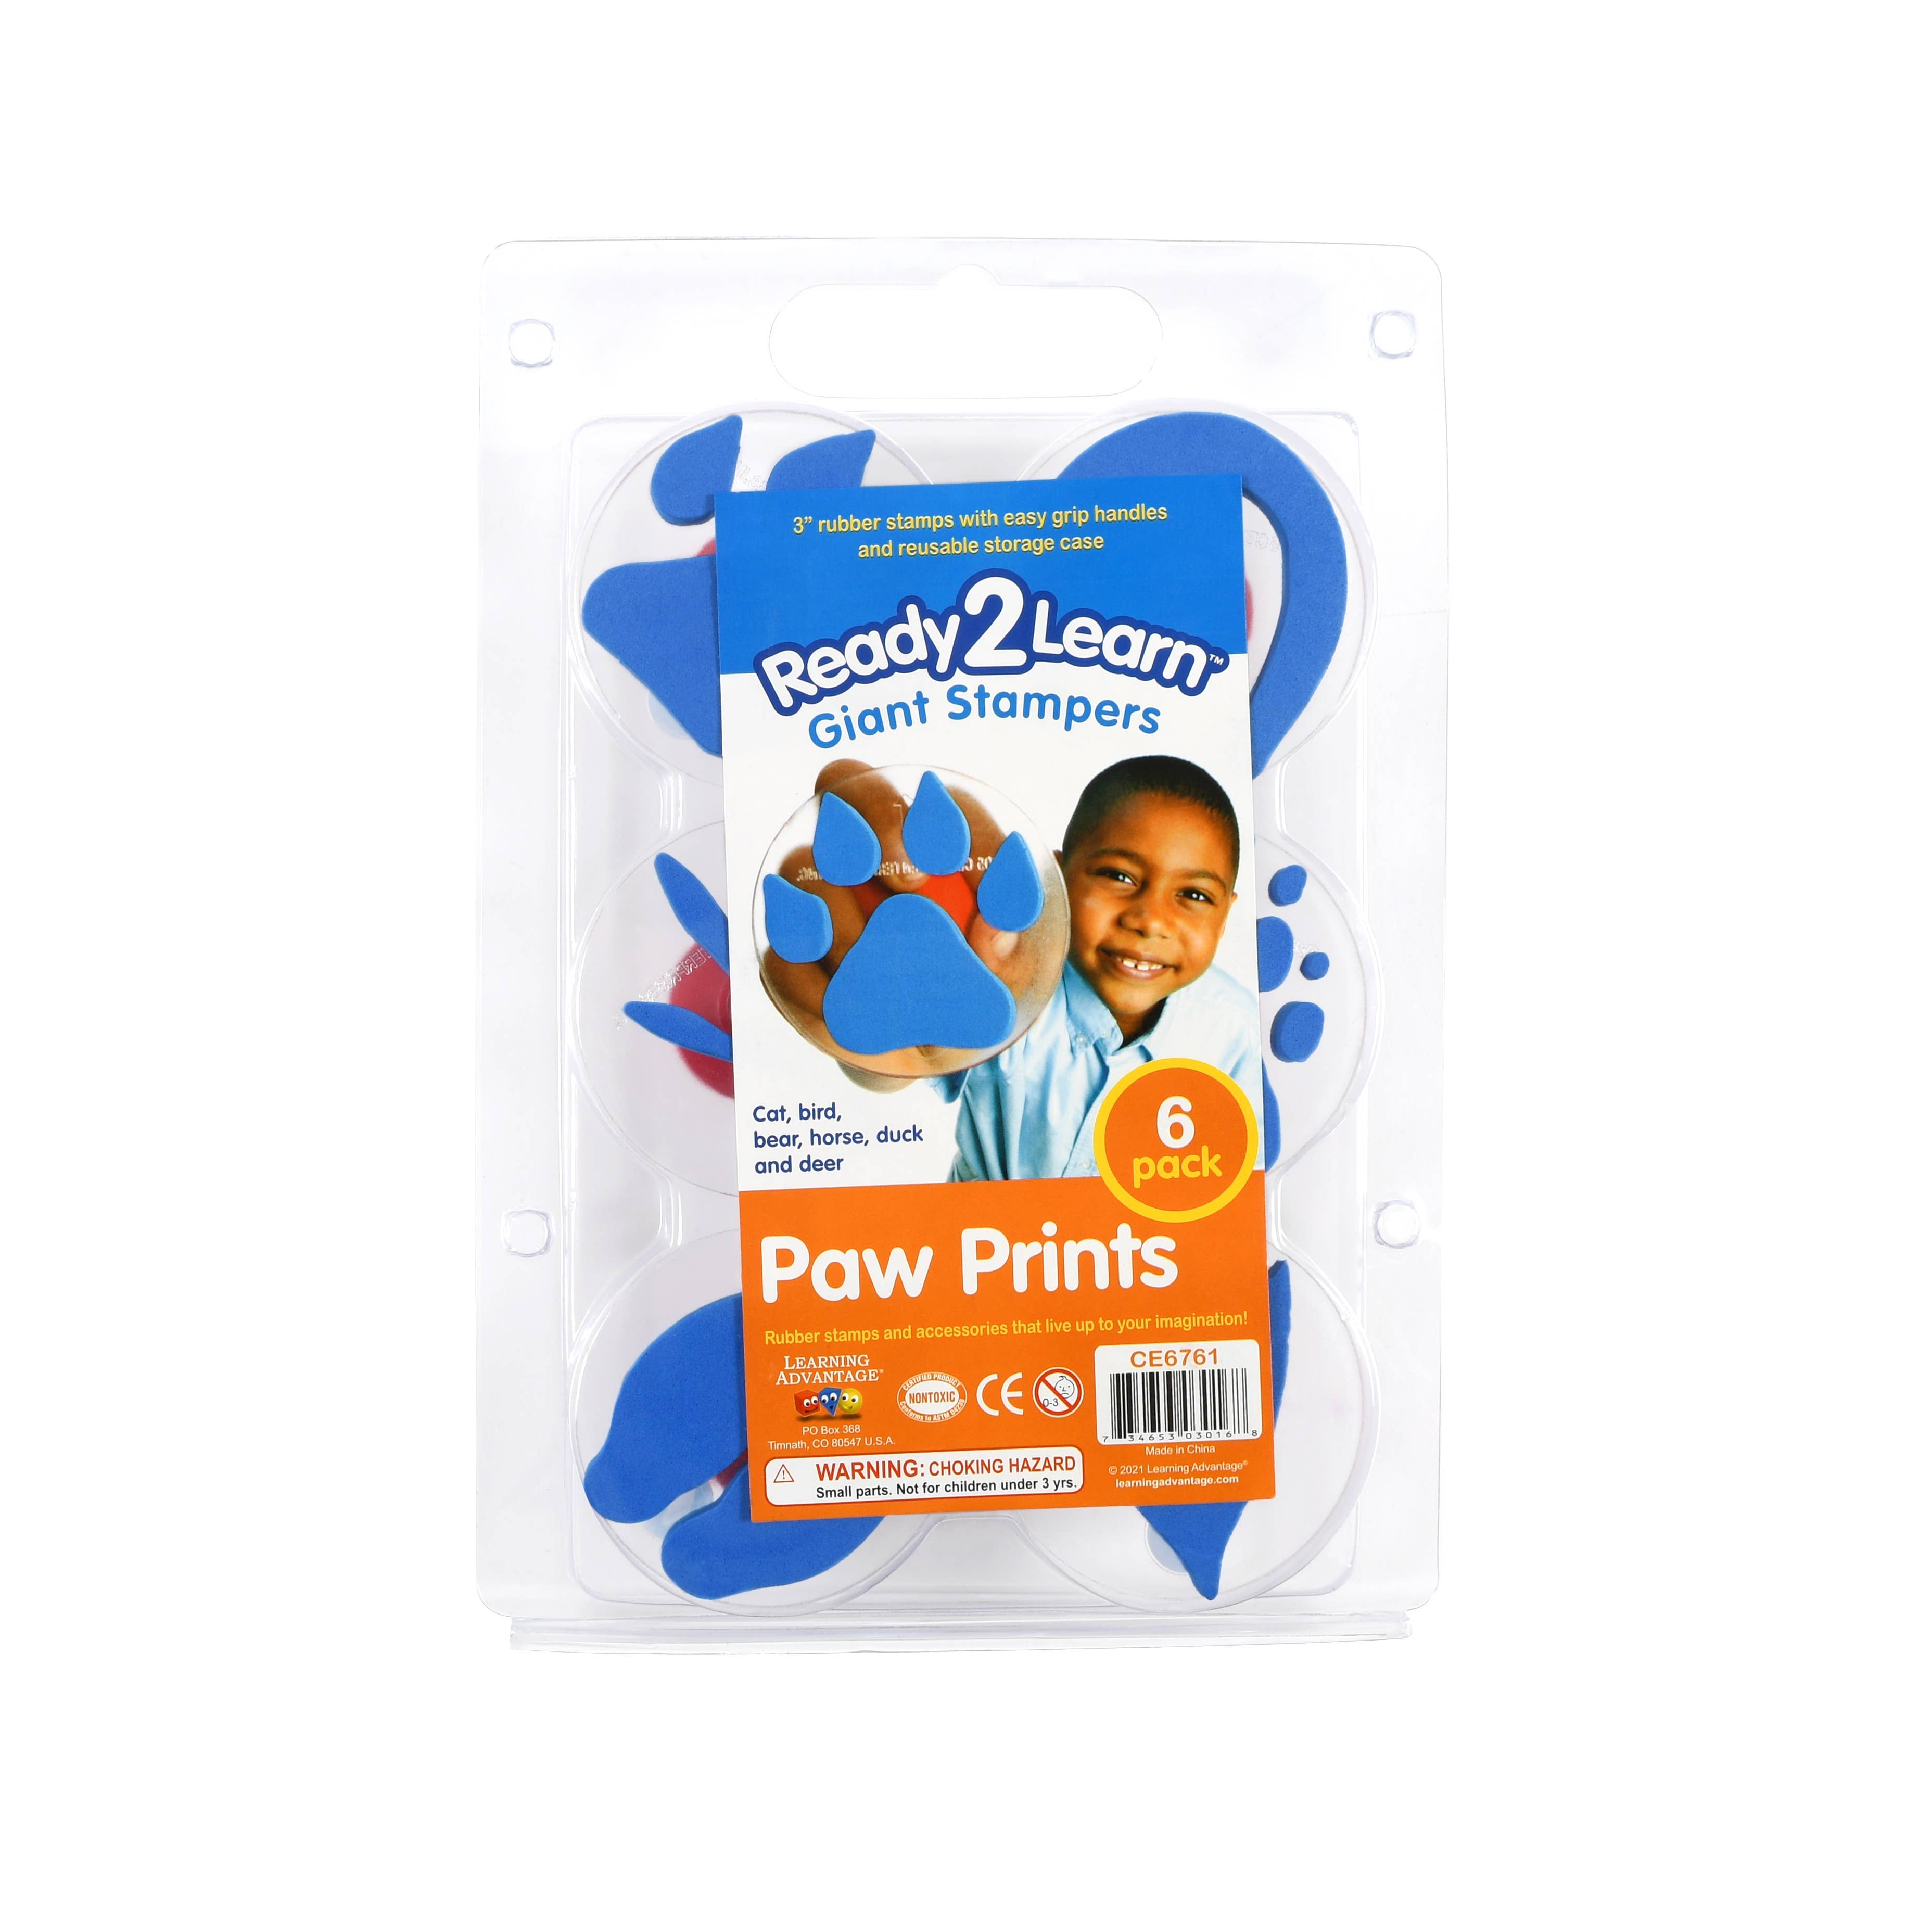 Giant Stampers - Paw Prints  - Set of 6